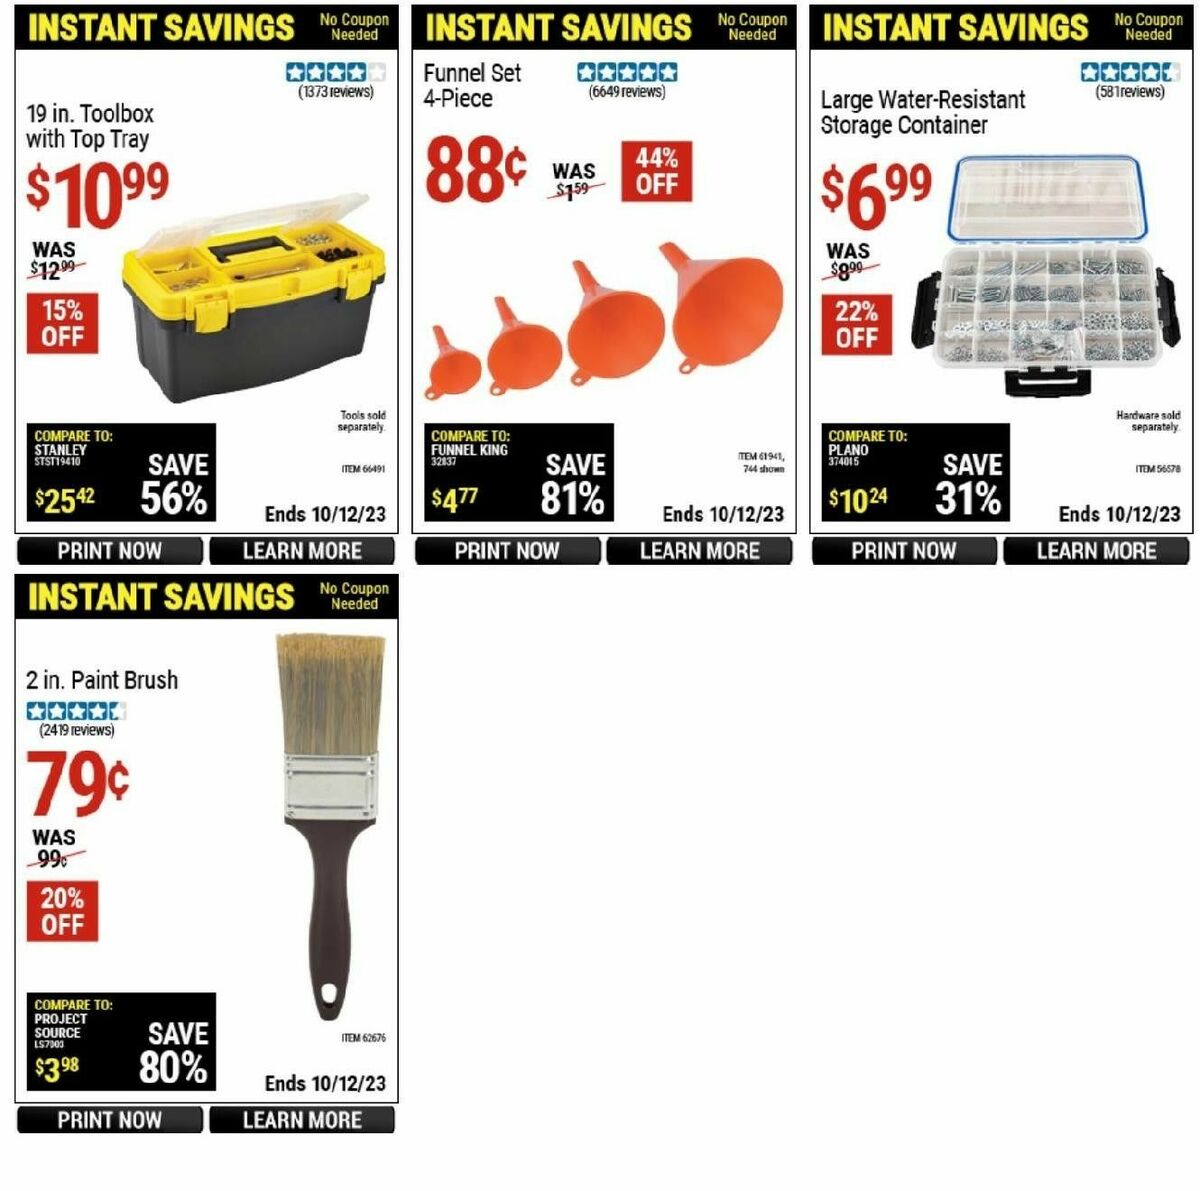 Harbor Freight Tools Instant Savings Weekly Ad from September 23